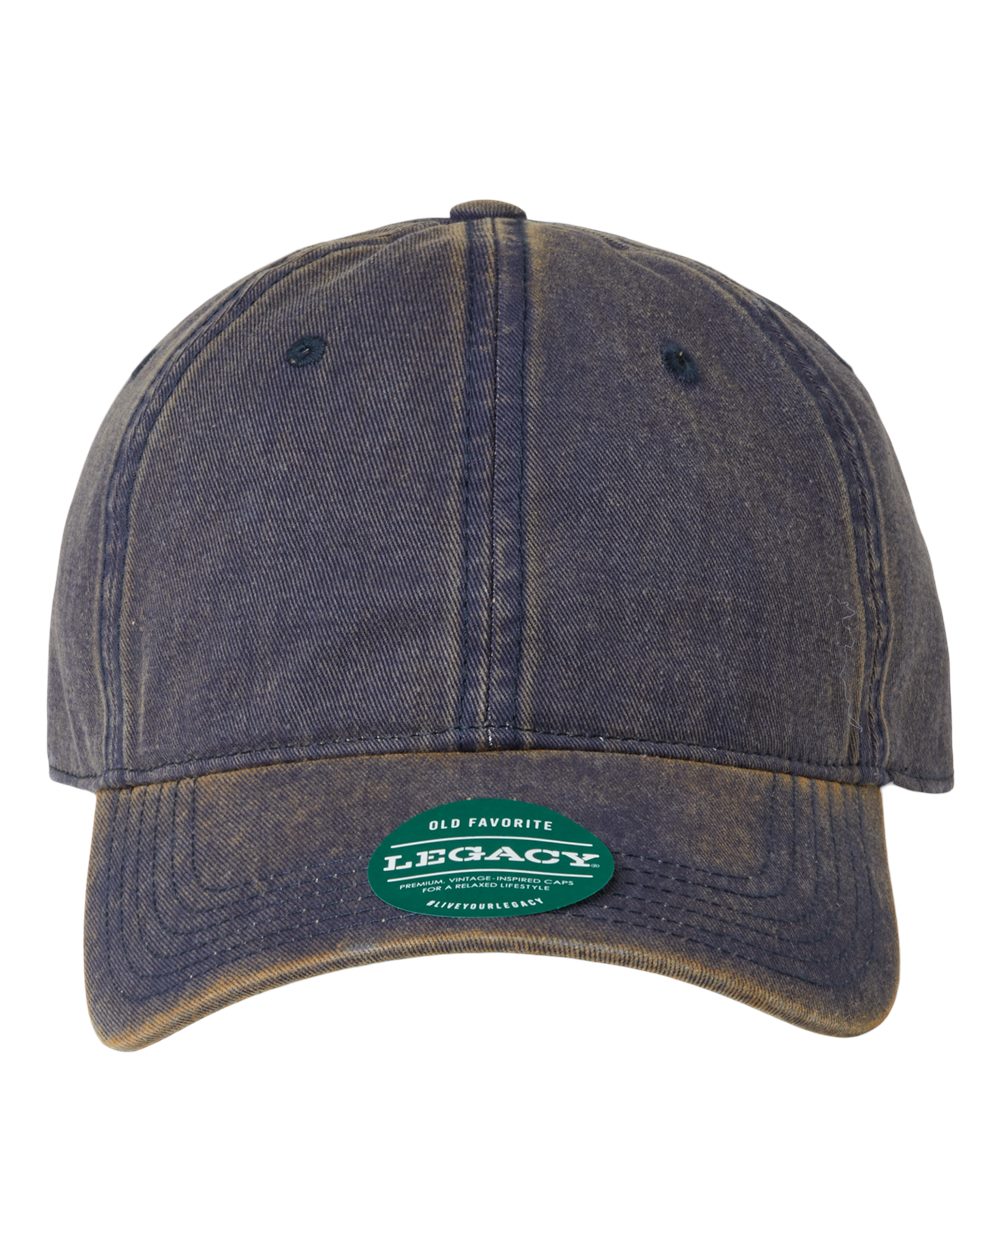 LEGACY - Old Favorite Solid Twill Cap - OFAST